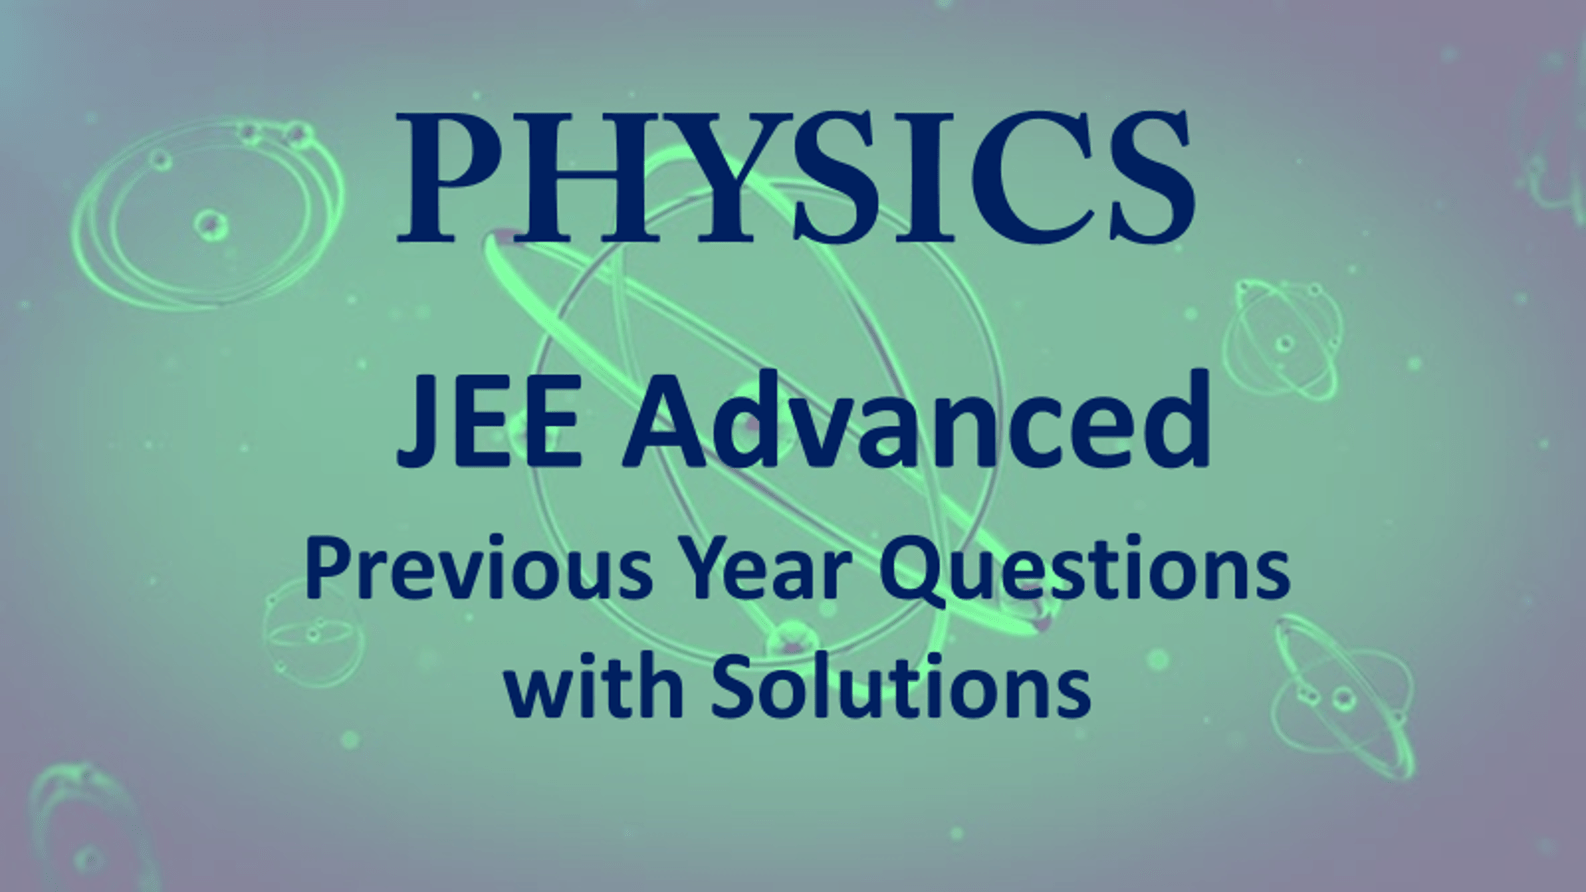 Physics Topic-wise JEE Advanced Previous Year Questions with Solutions